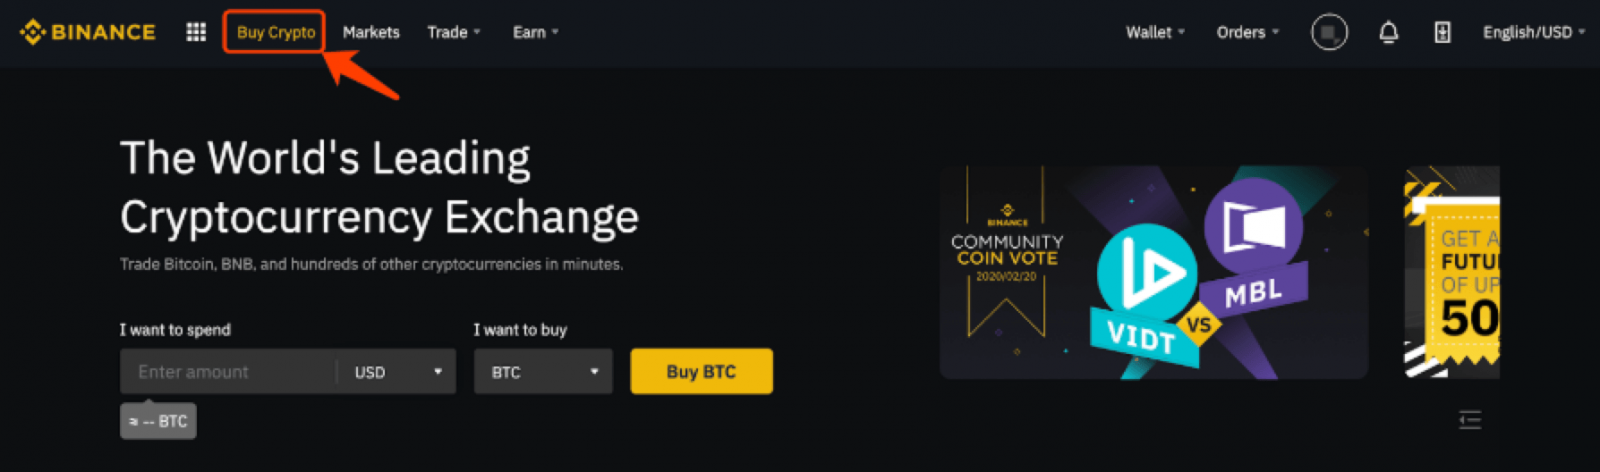 How to Buy and Sell Crypto on Binance with RUB